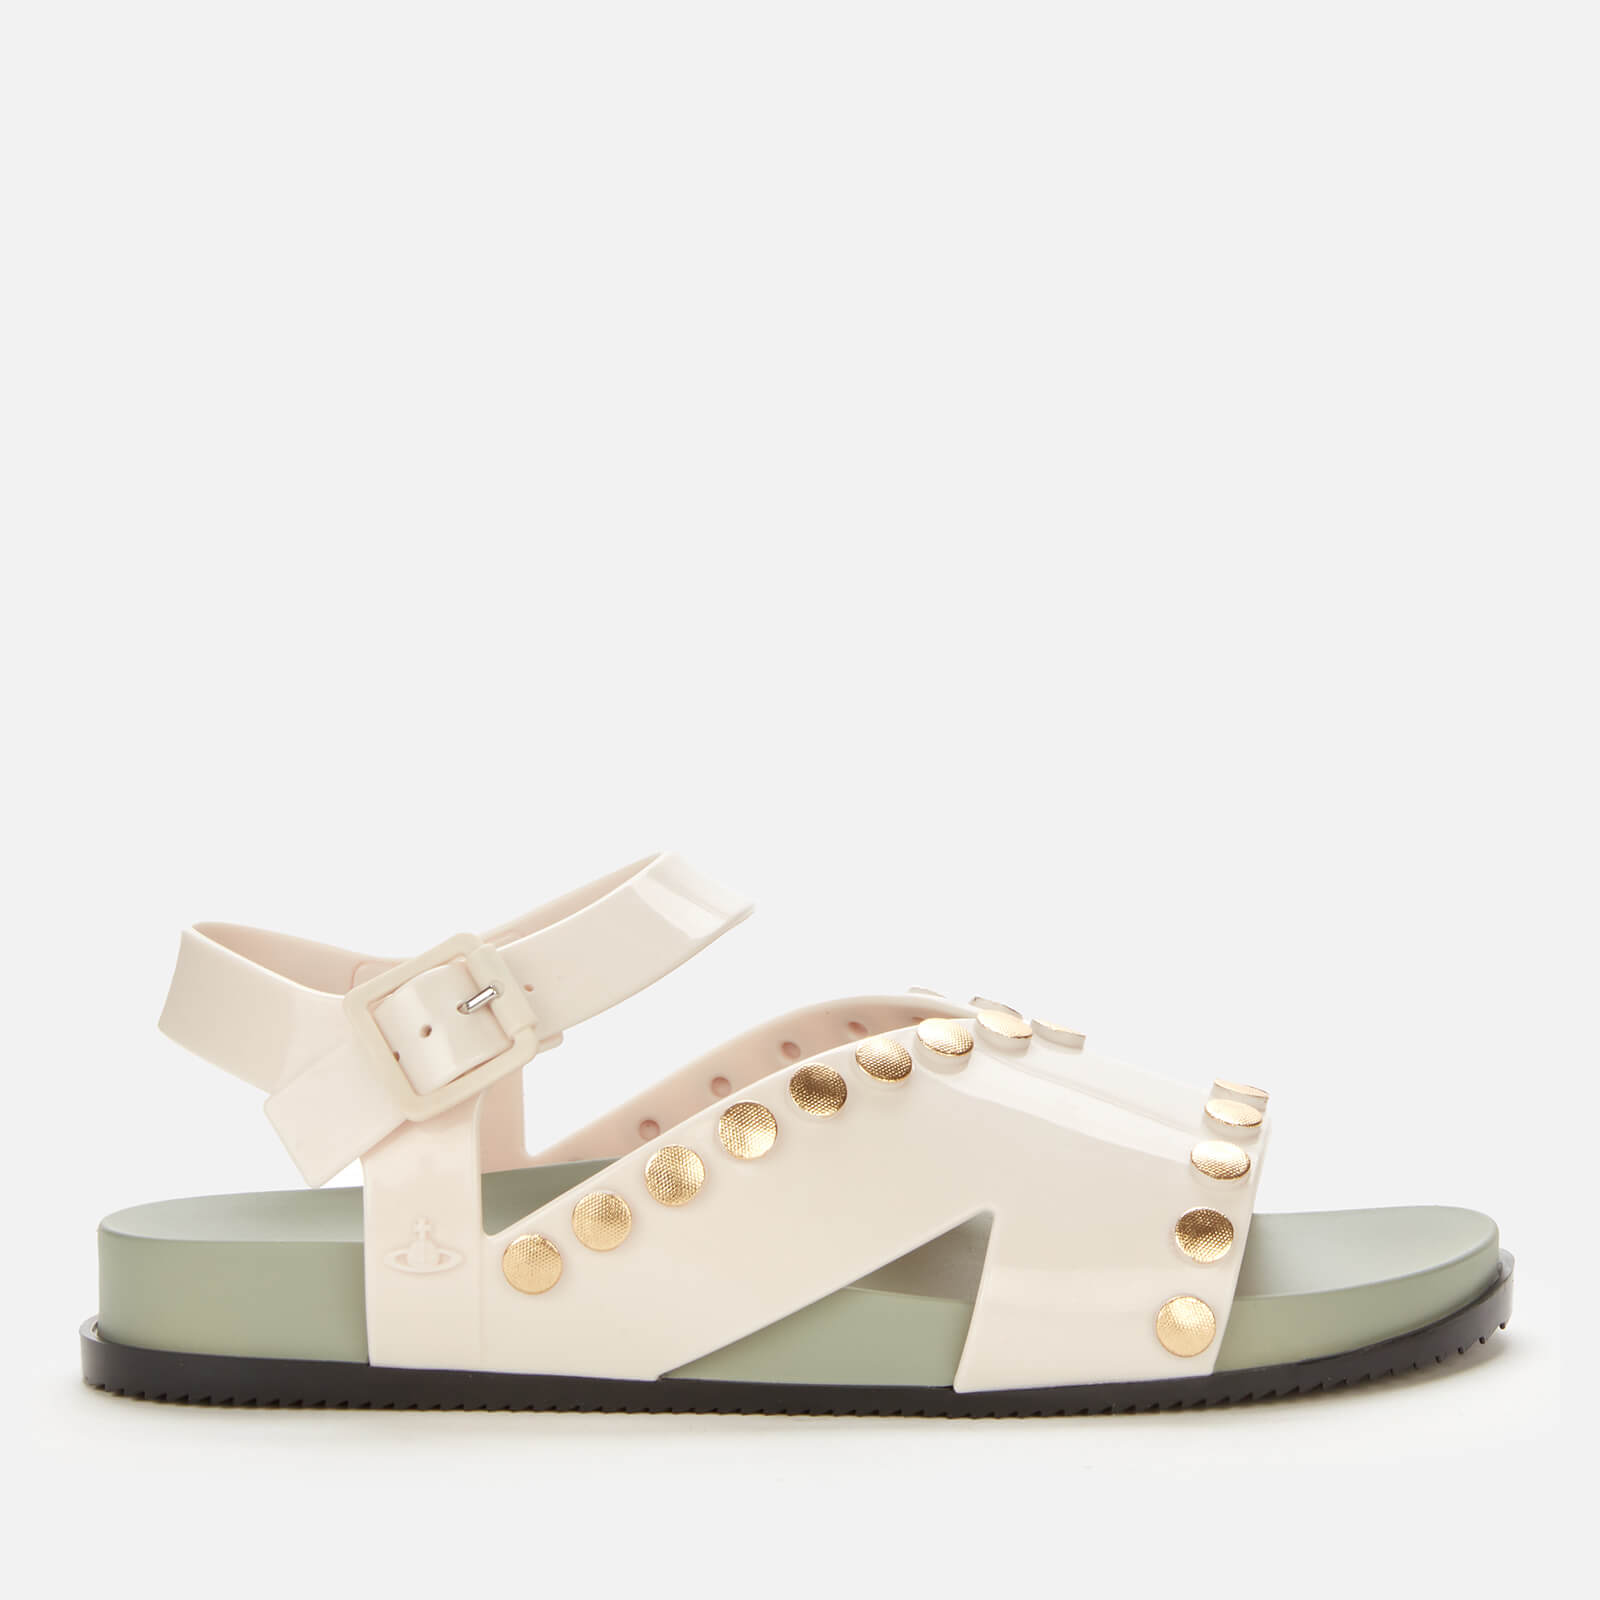 Vivienne Westwood for Melissa Women's Ciao Sandals - Ivory - UK 3